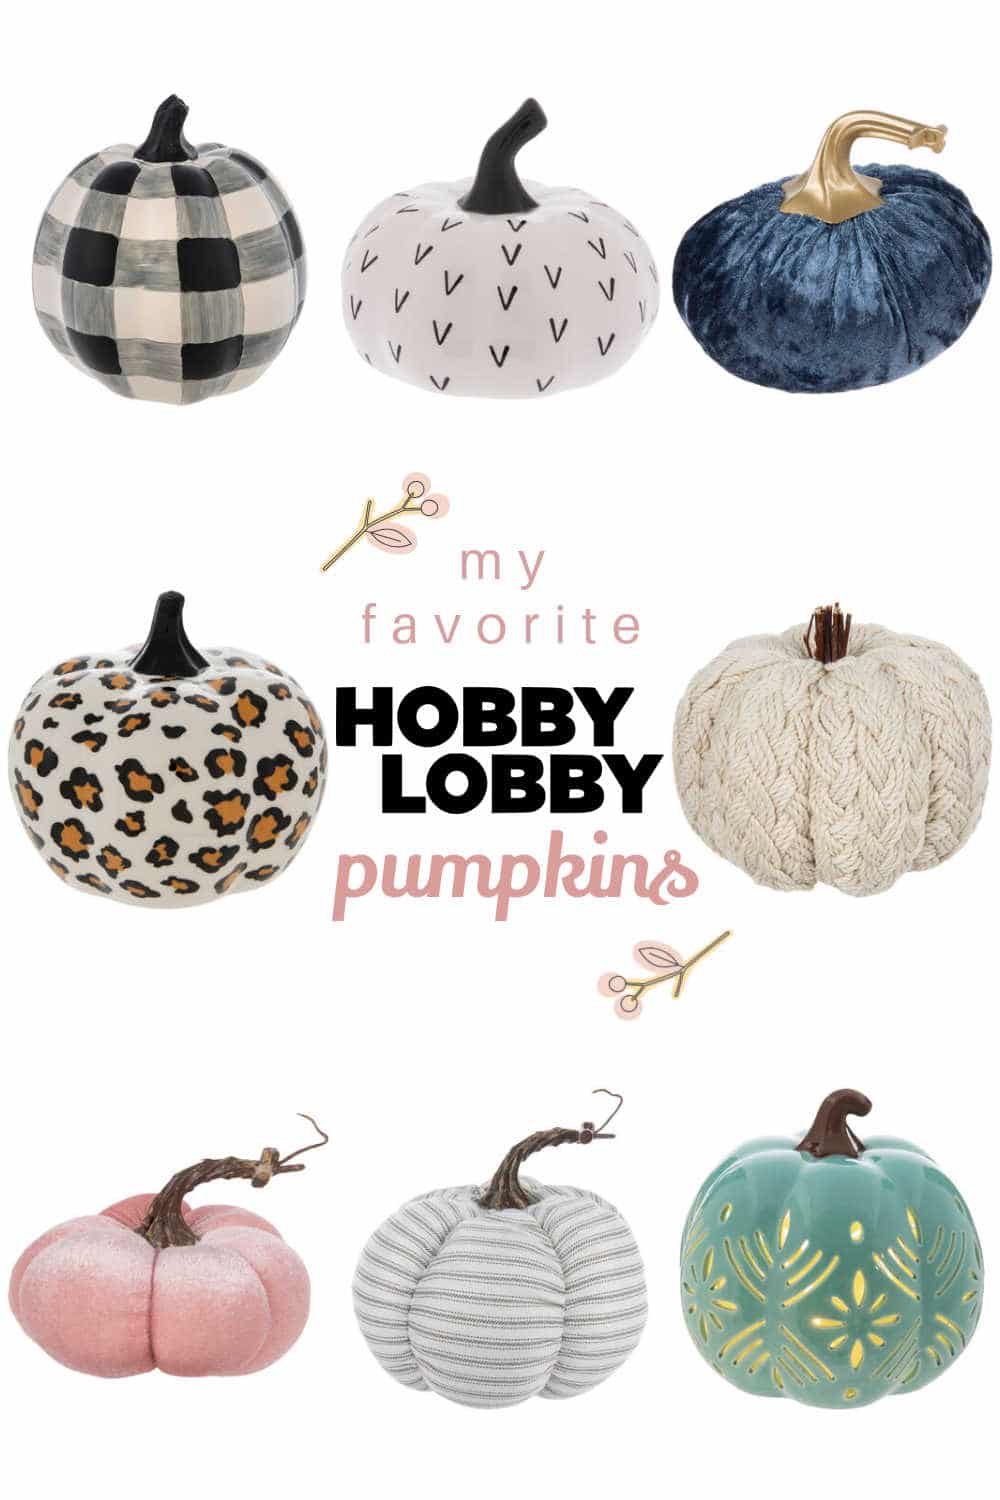 My favorite hobby lobby pumpkins from their fall department 